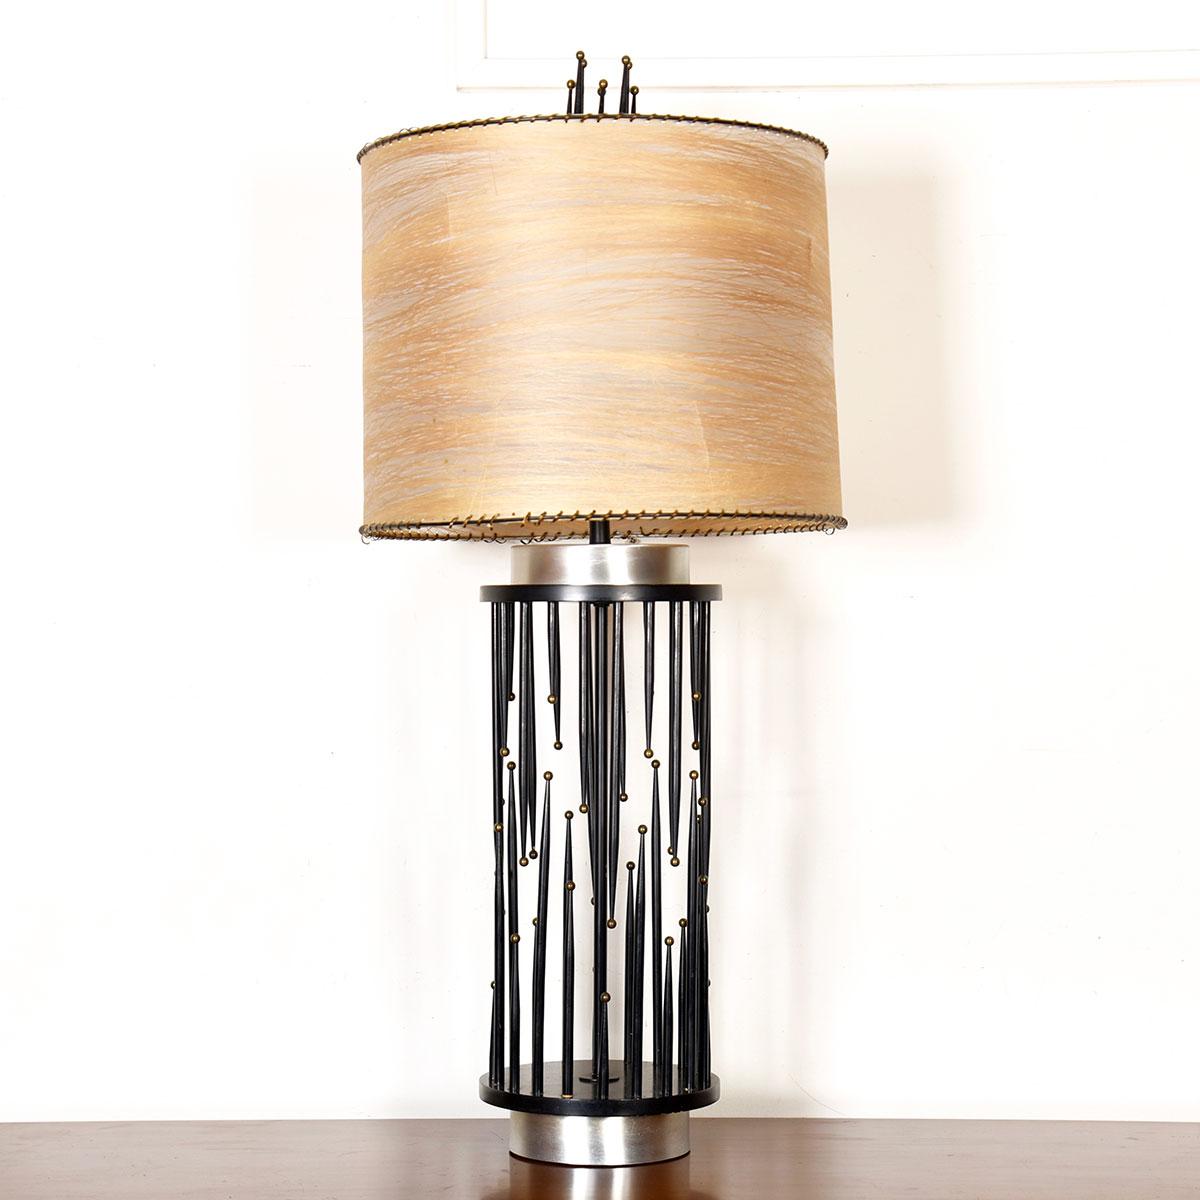 Stalactite Table Lamp in Fascinating Brutalist Style w. Original Matching Finial

Additional information:
Featured at DC

Dimension: Ø 9? x H 28.25 to socket.